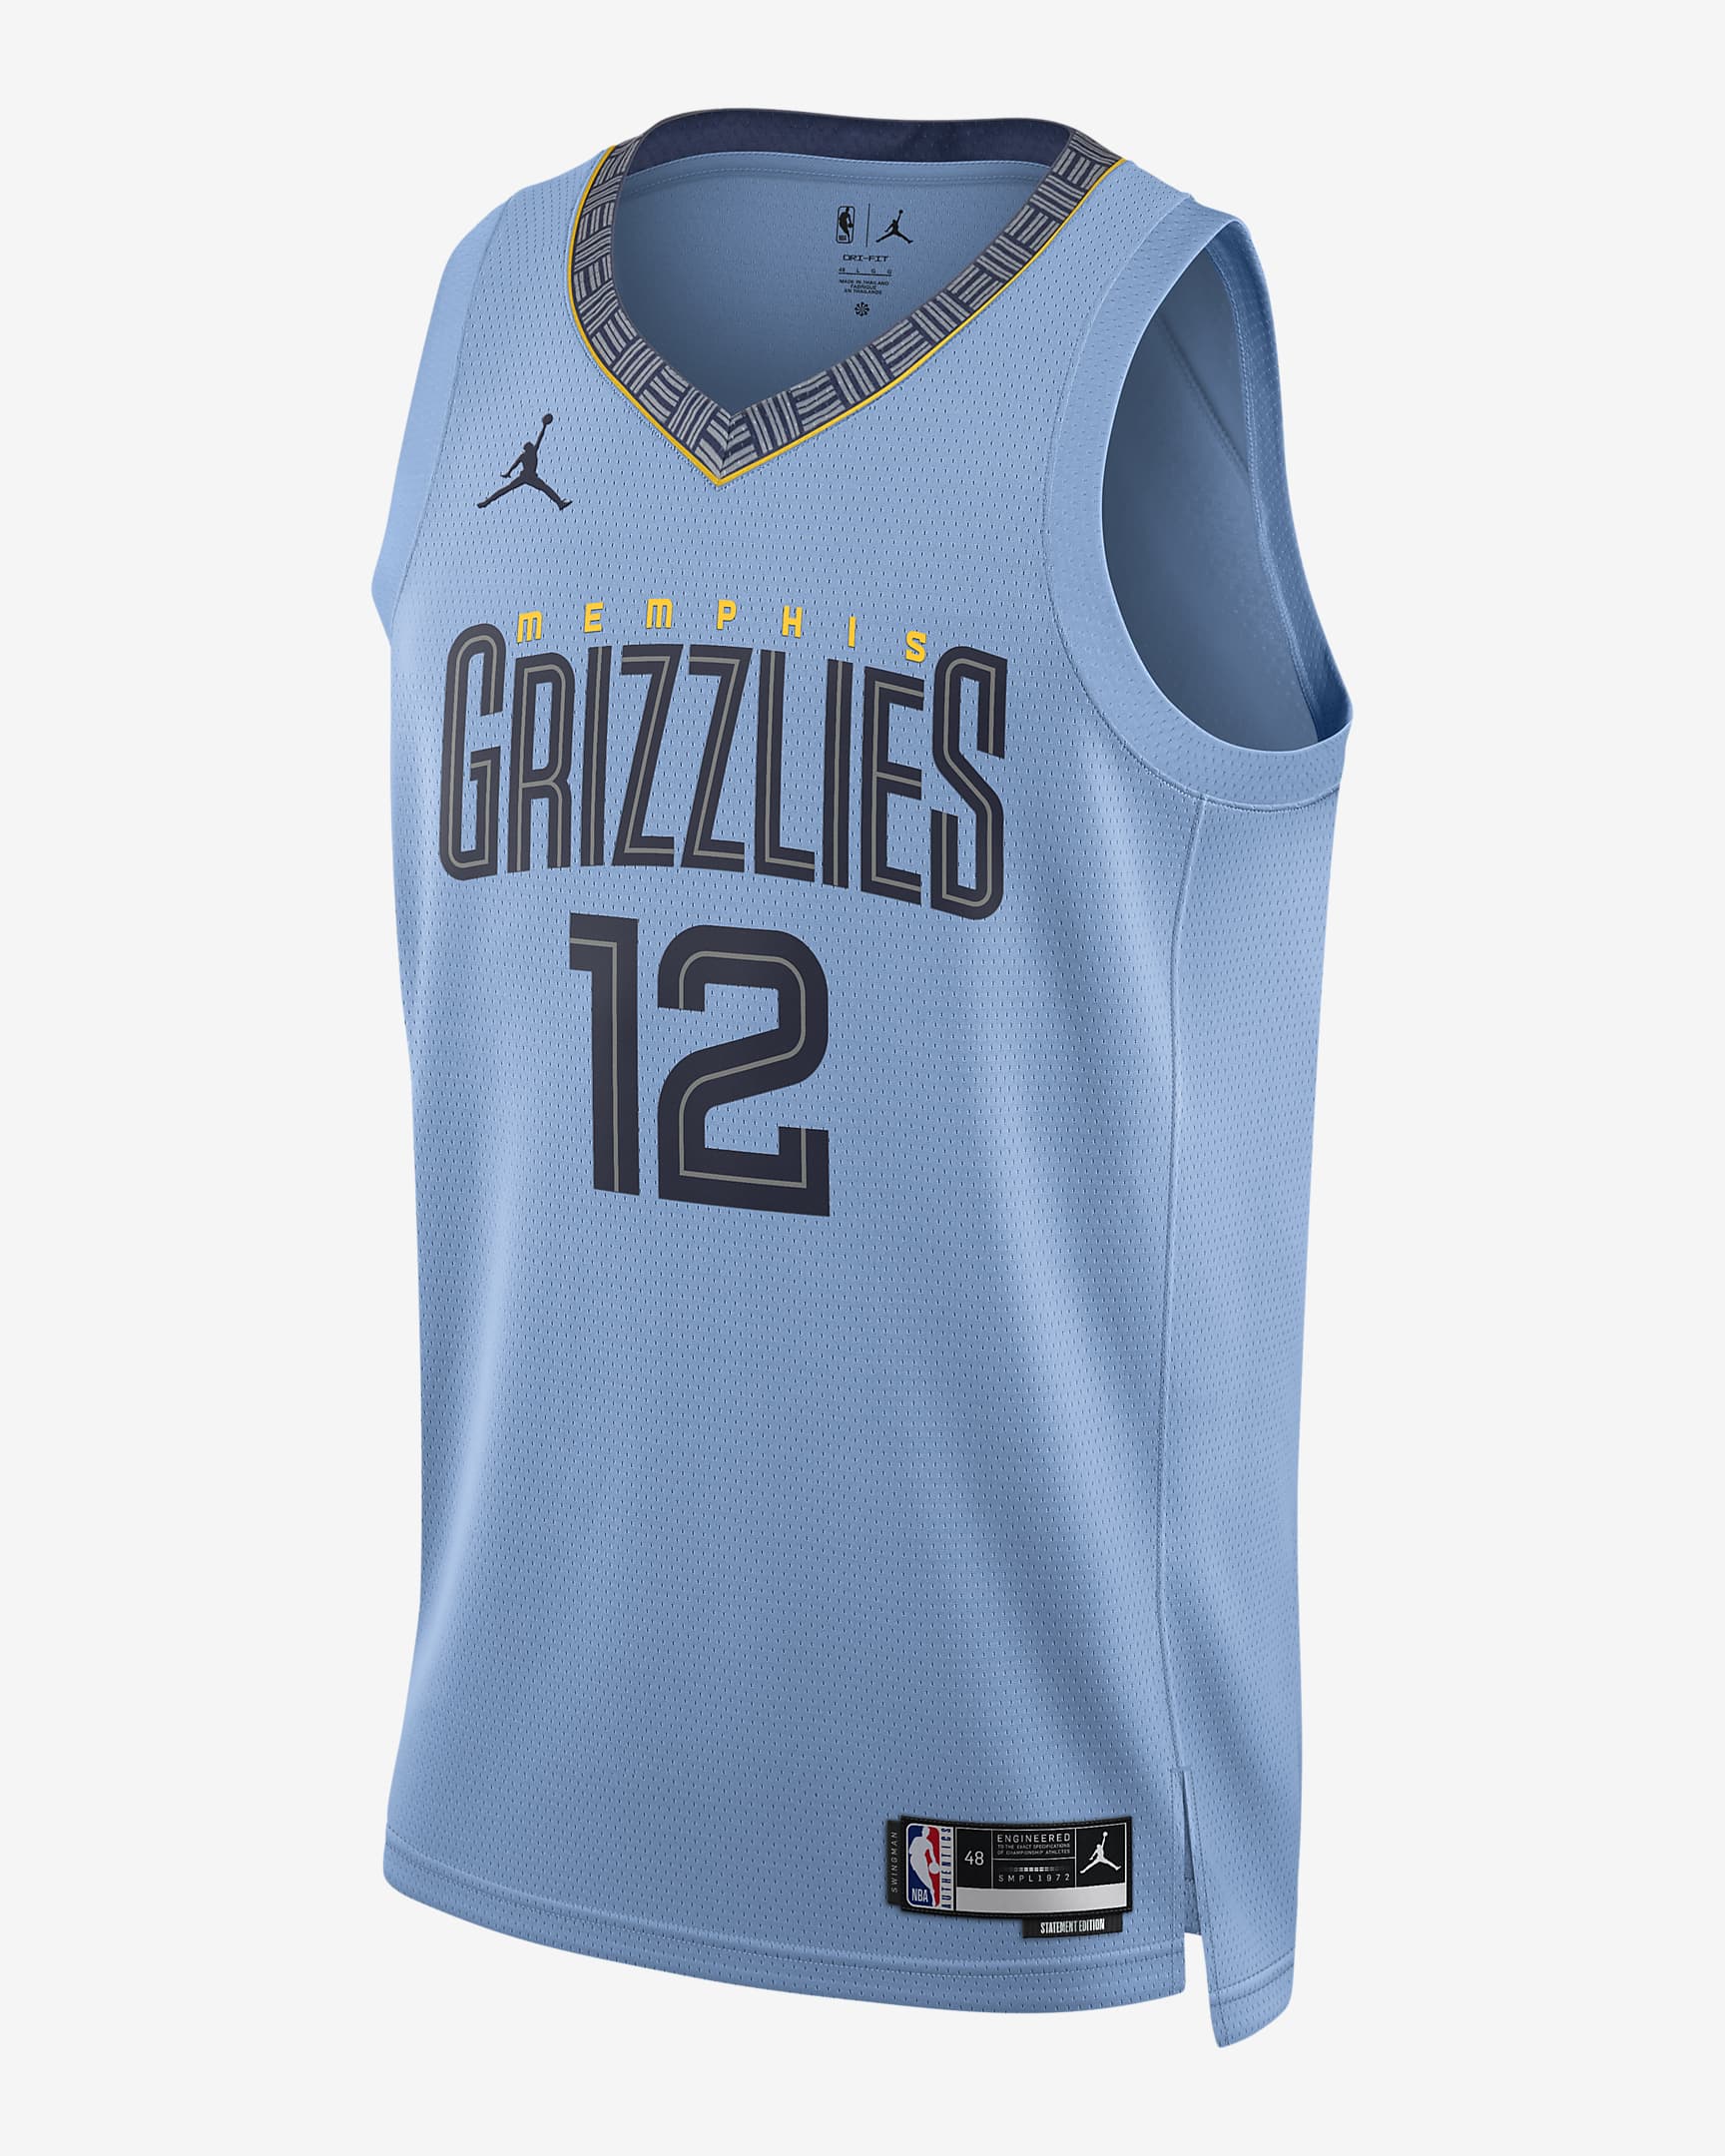 Jazz will wear jerseys from 1996-2004 for 11 games this season